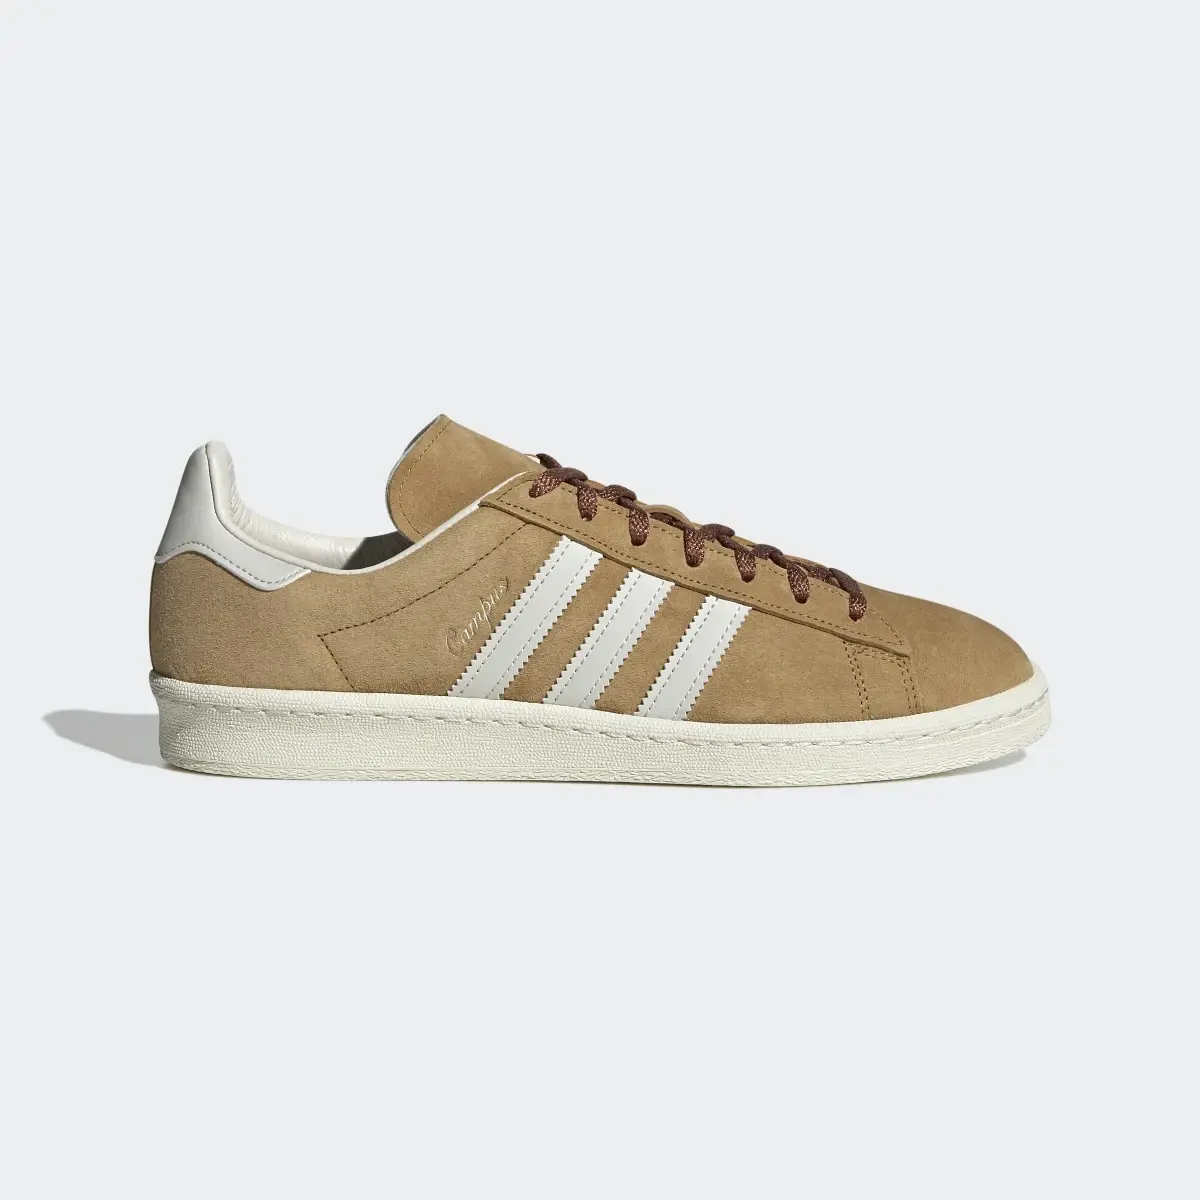 Adidas Campus 80s Shoes. 2